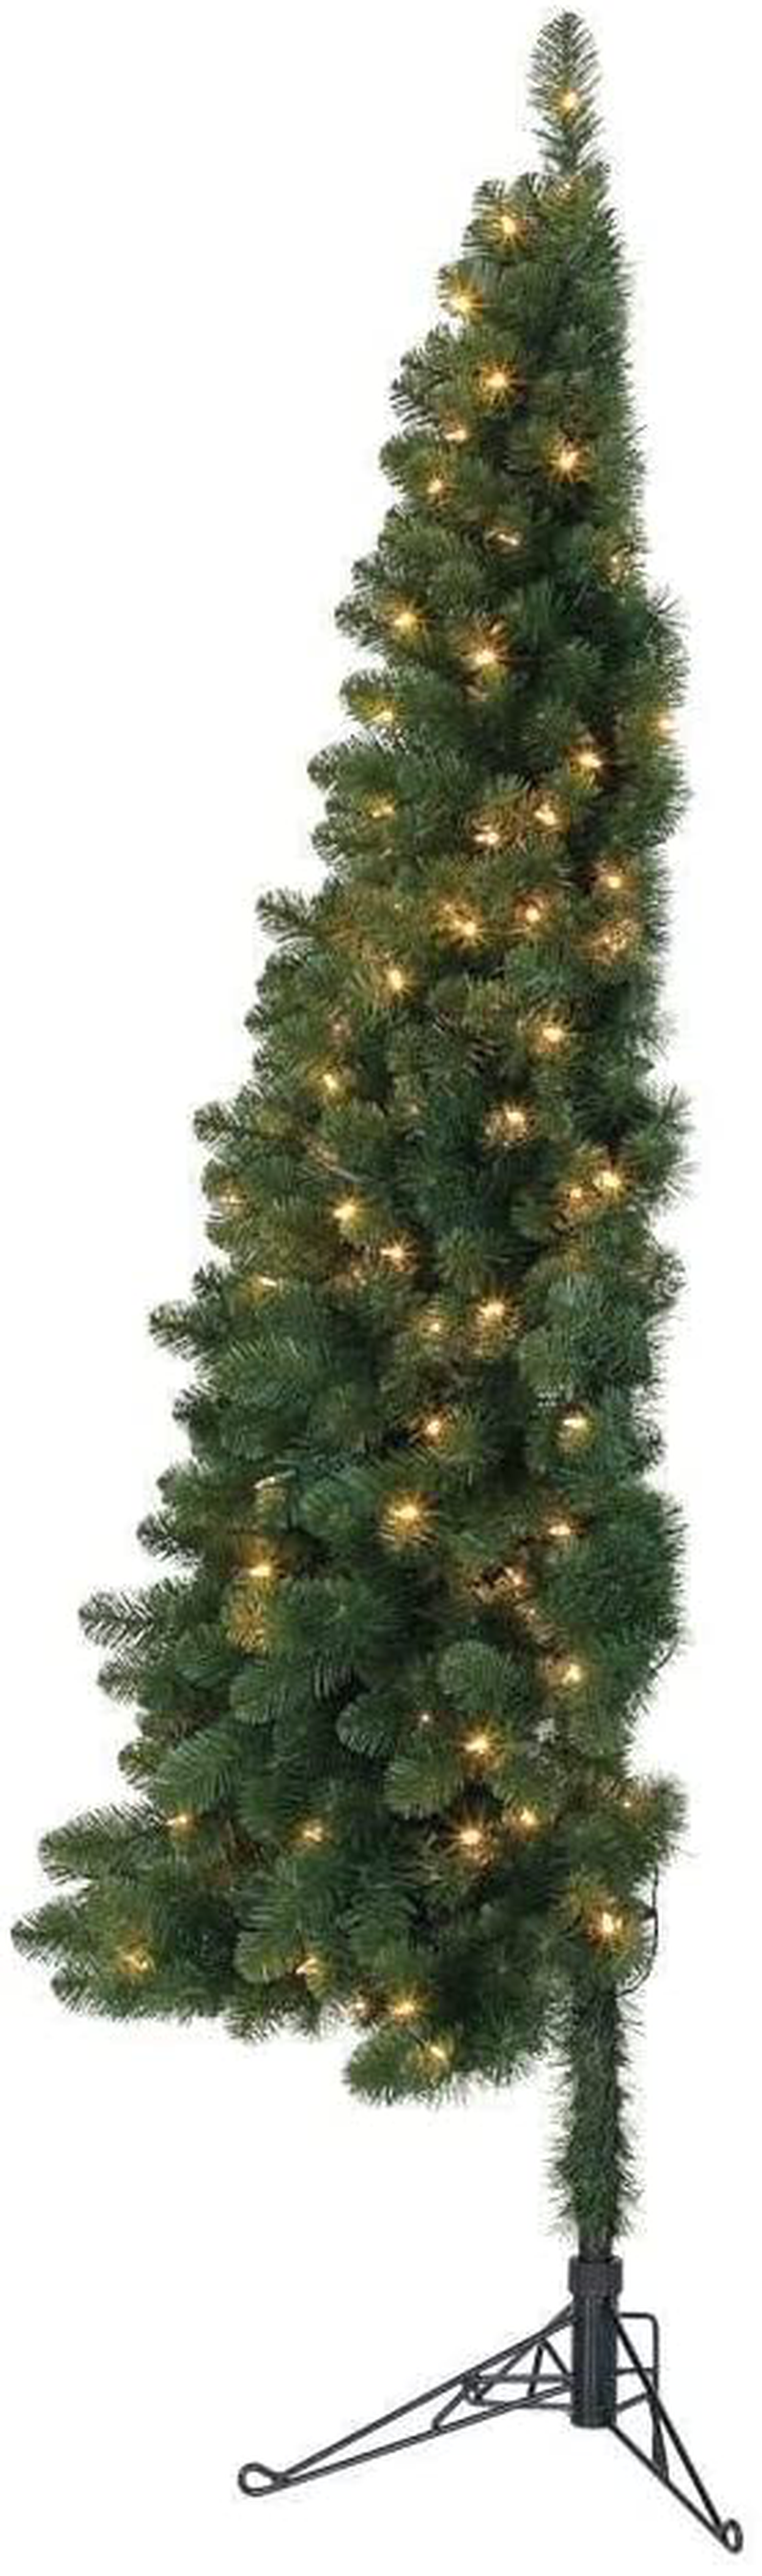 Home Heritage 7 Foot Pre-Lit Artificial Half Pine Christmas Tree with Warm White LED Lights and Folding Stand